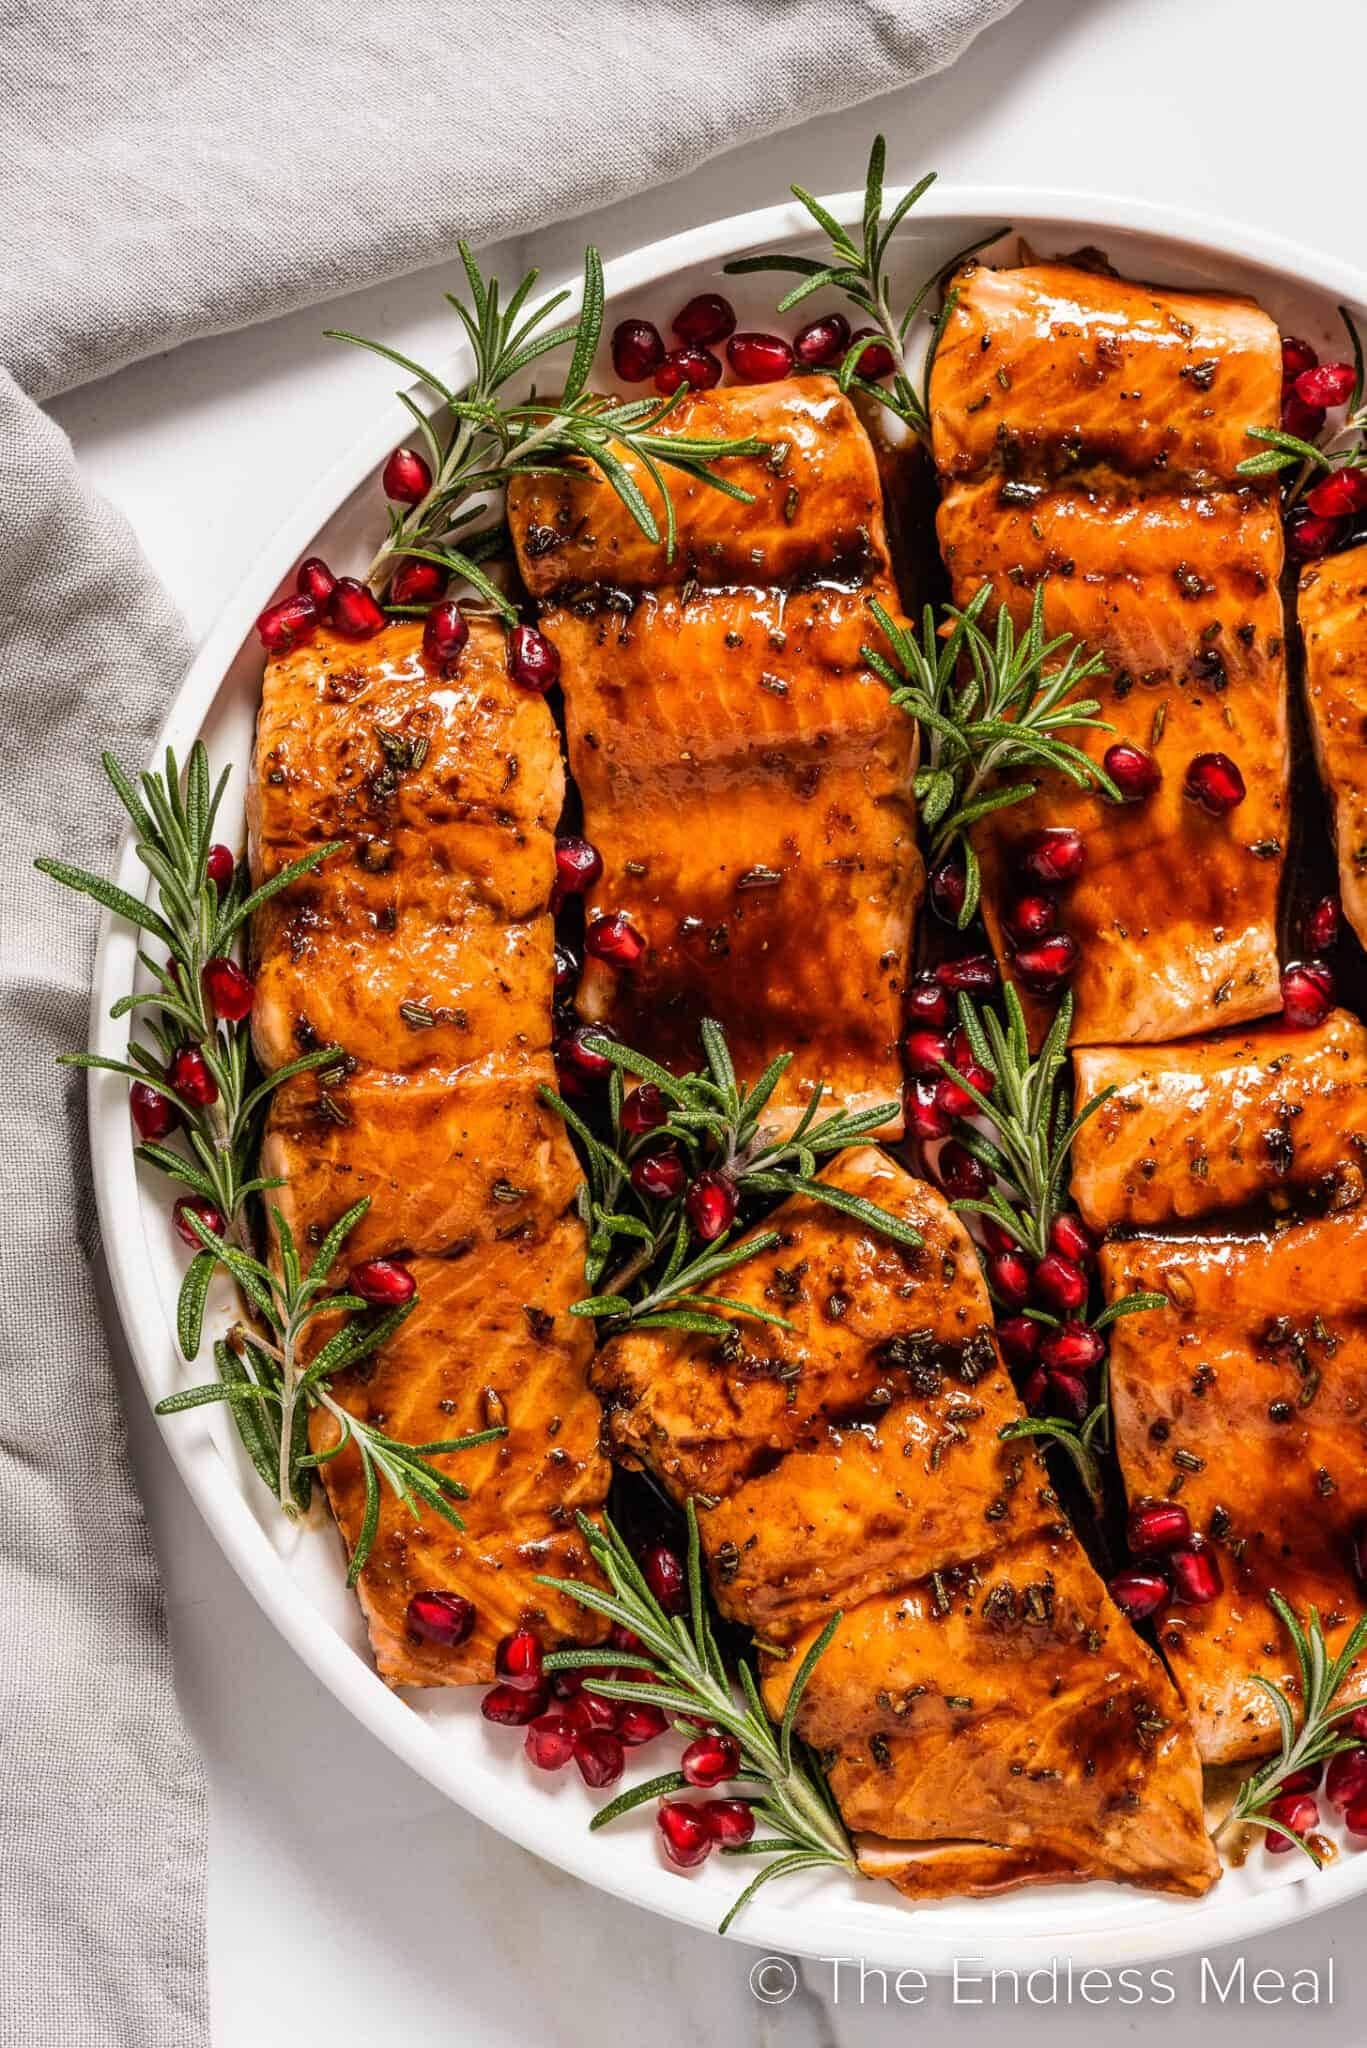 Glazed salmon with with fresh rosemary sprigs and pomegranate seeds.